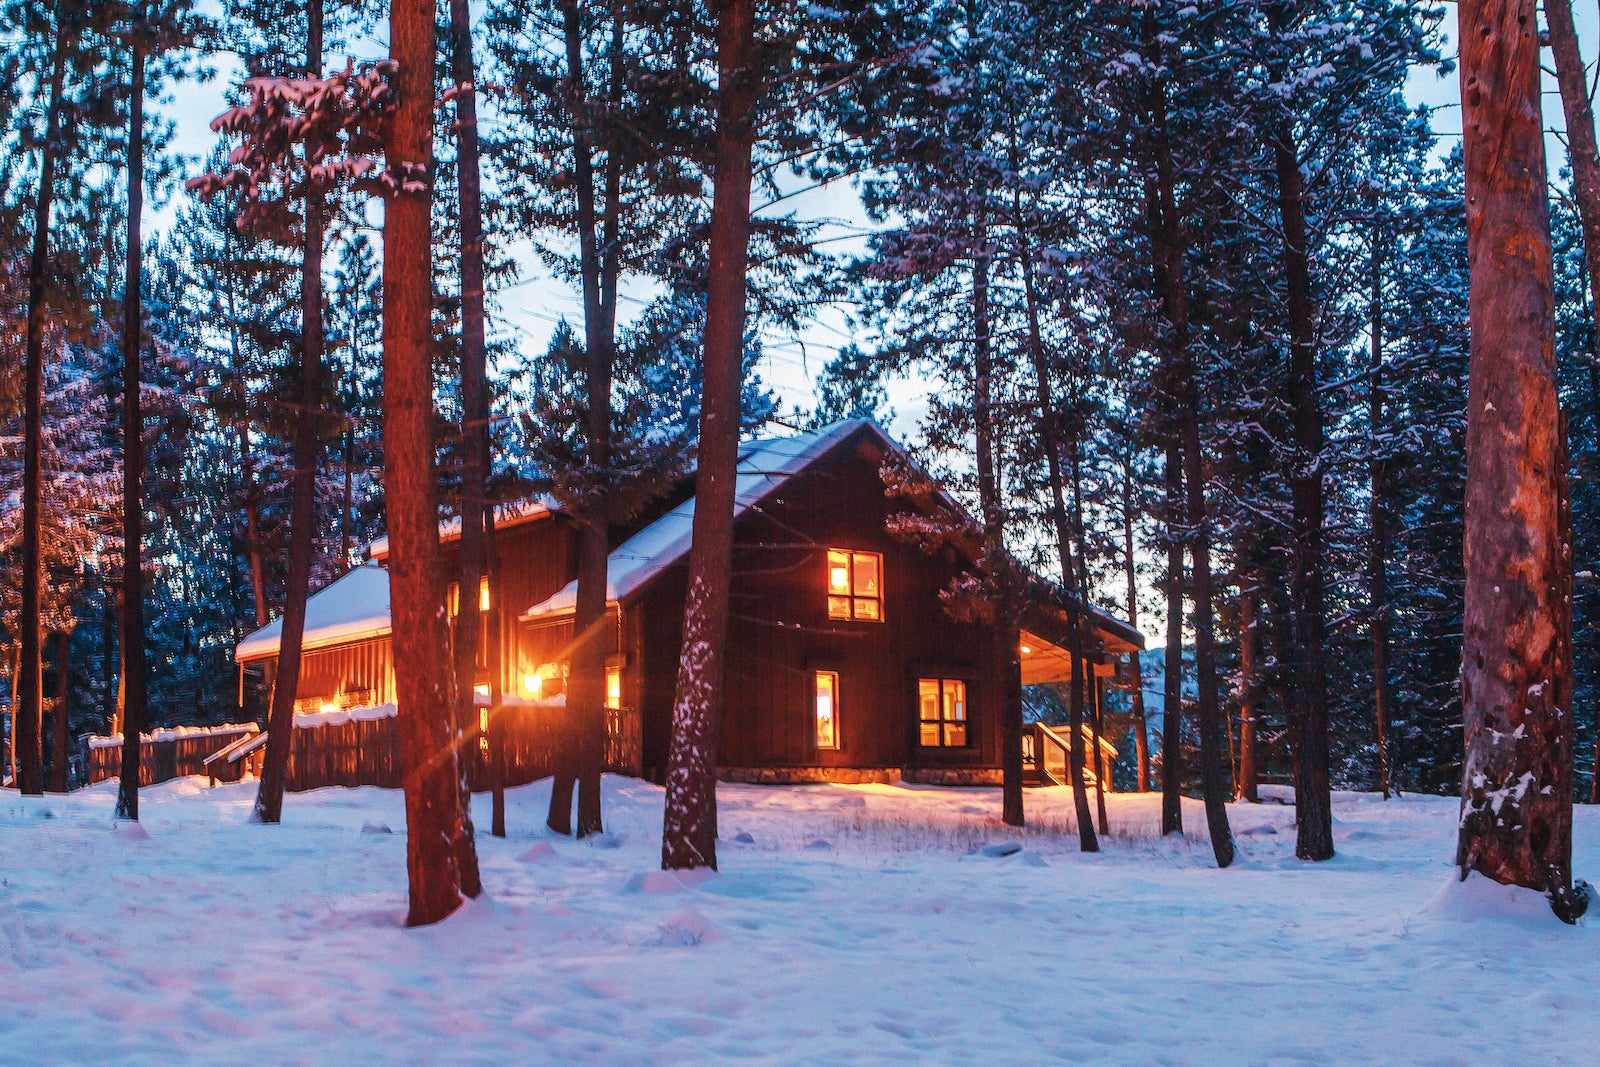 A cabin in the snowy woods